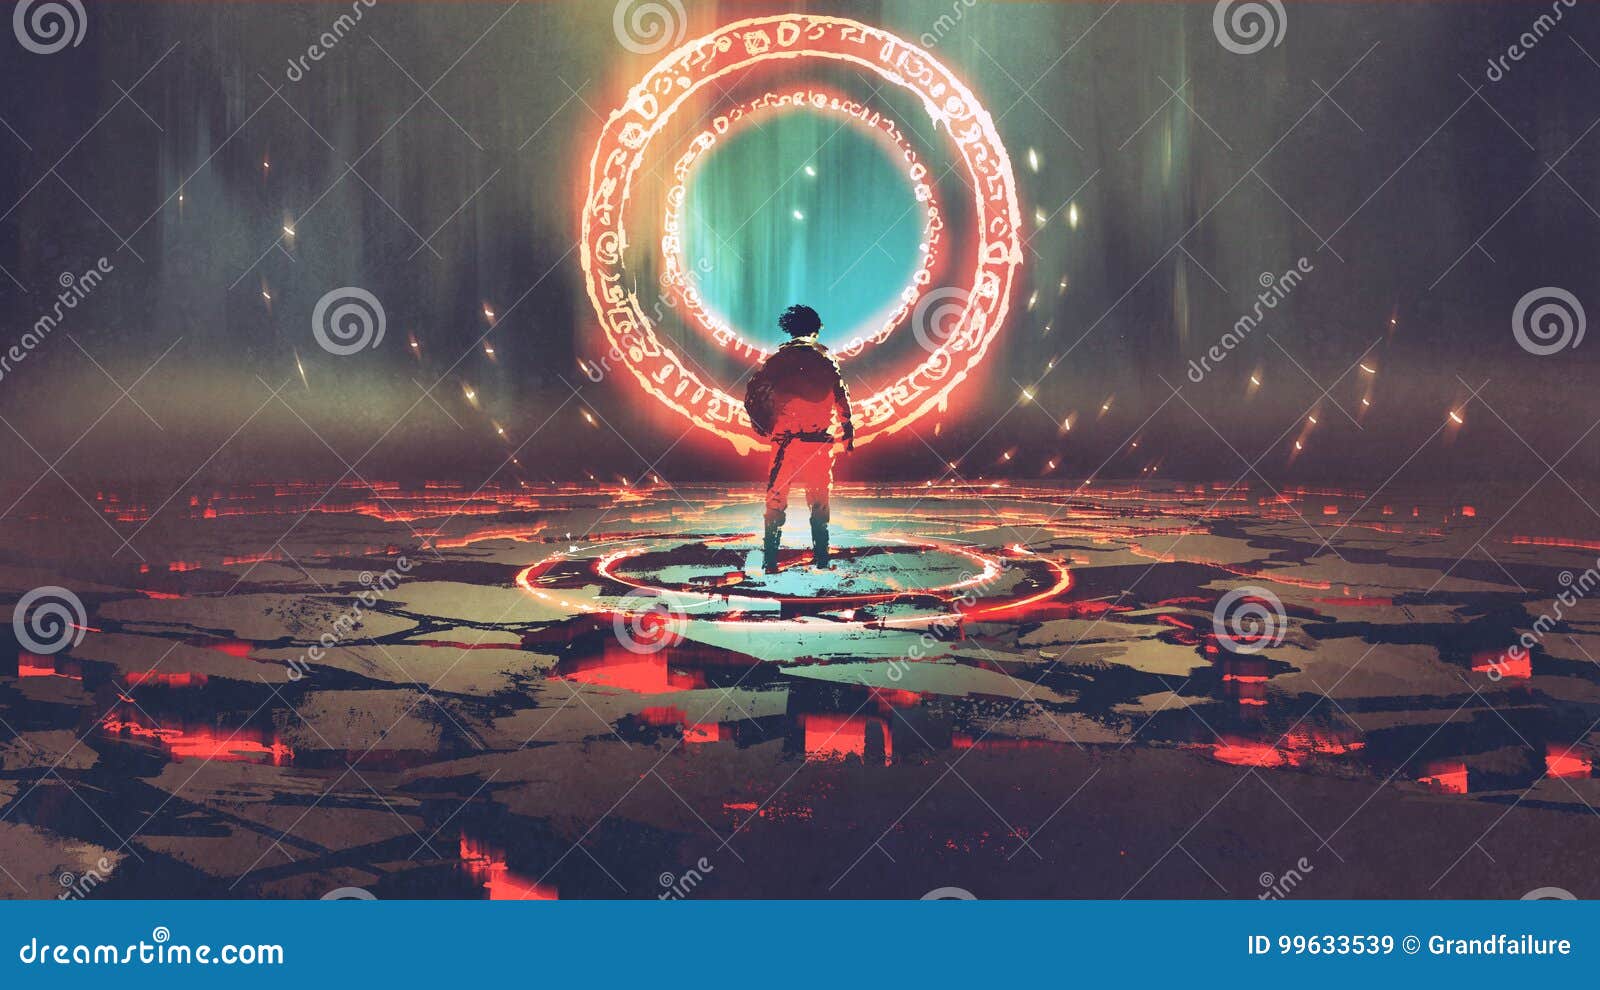 man standing in front of magic circle